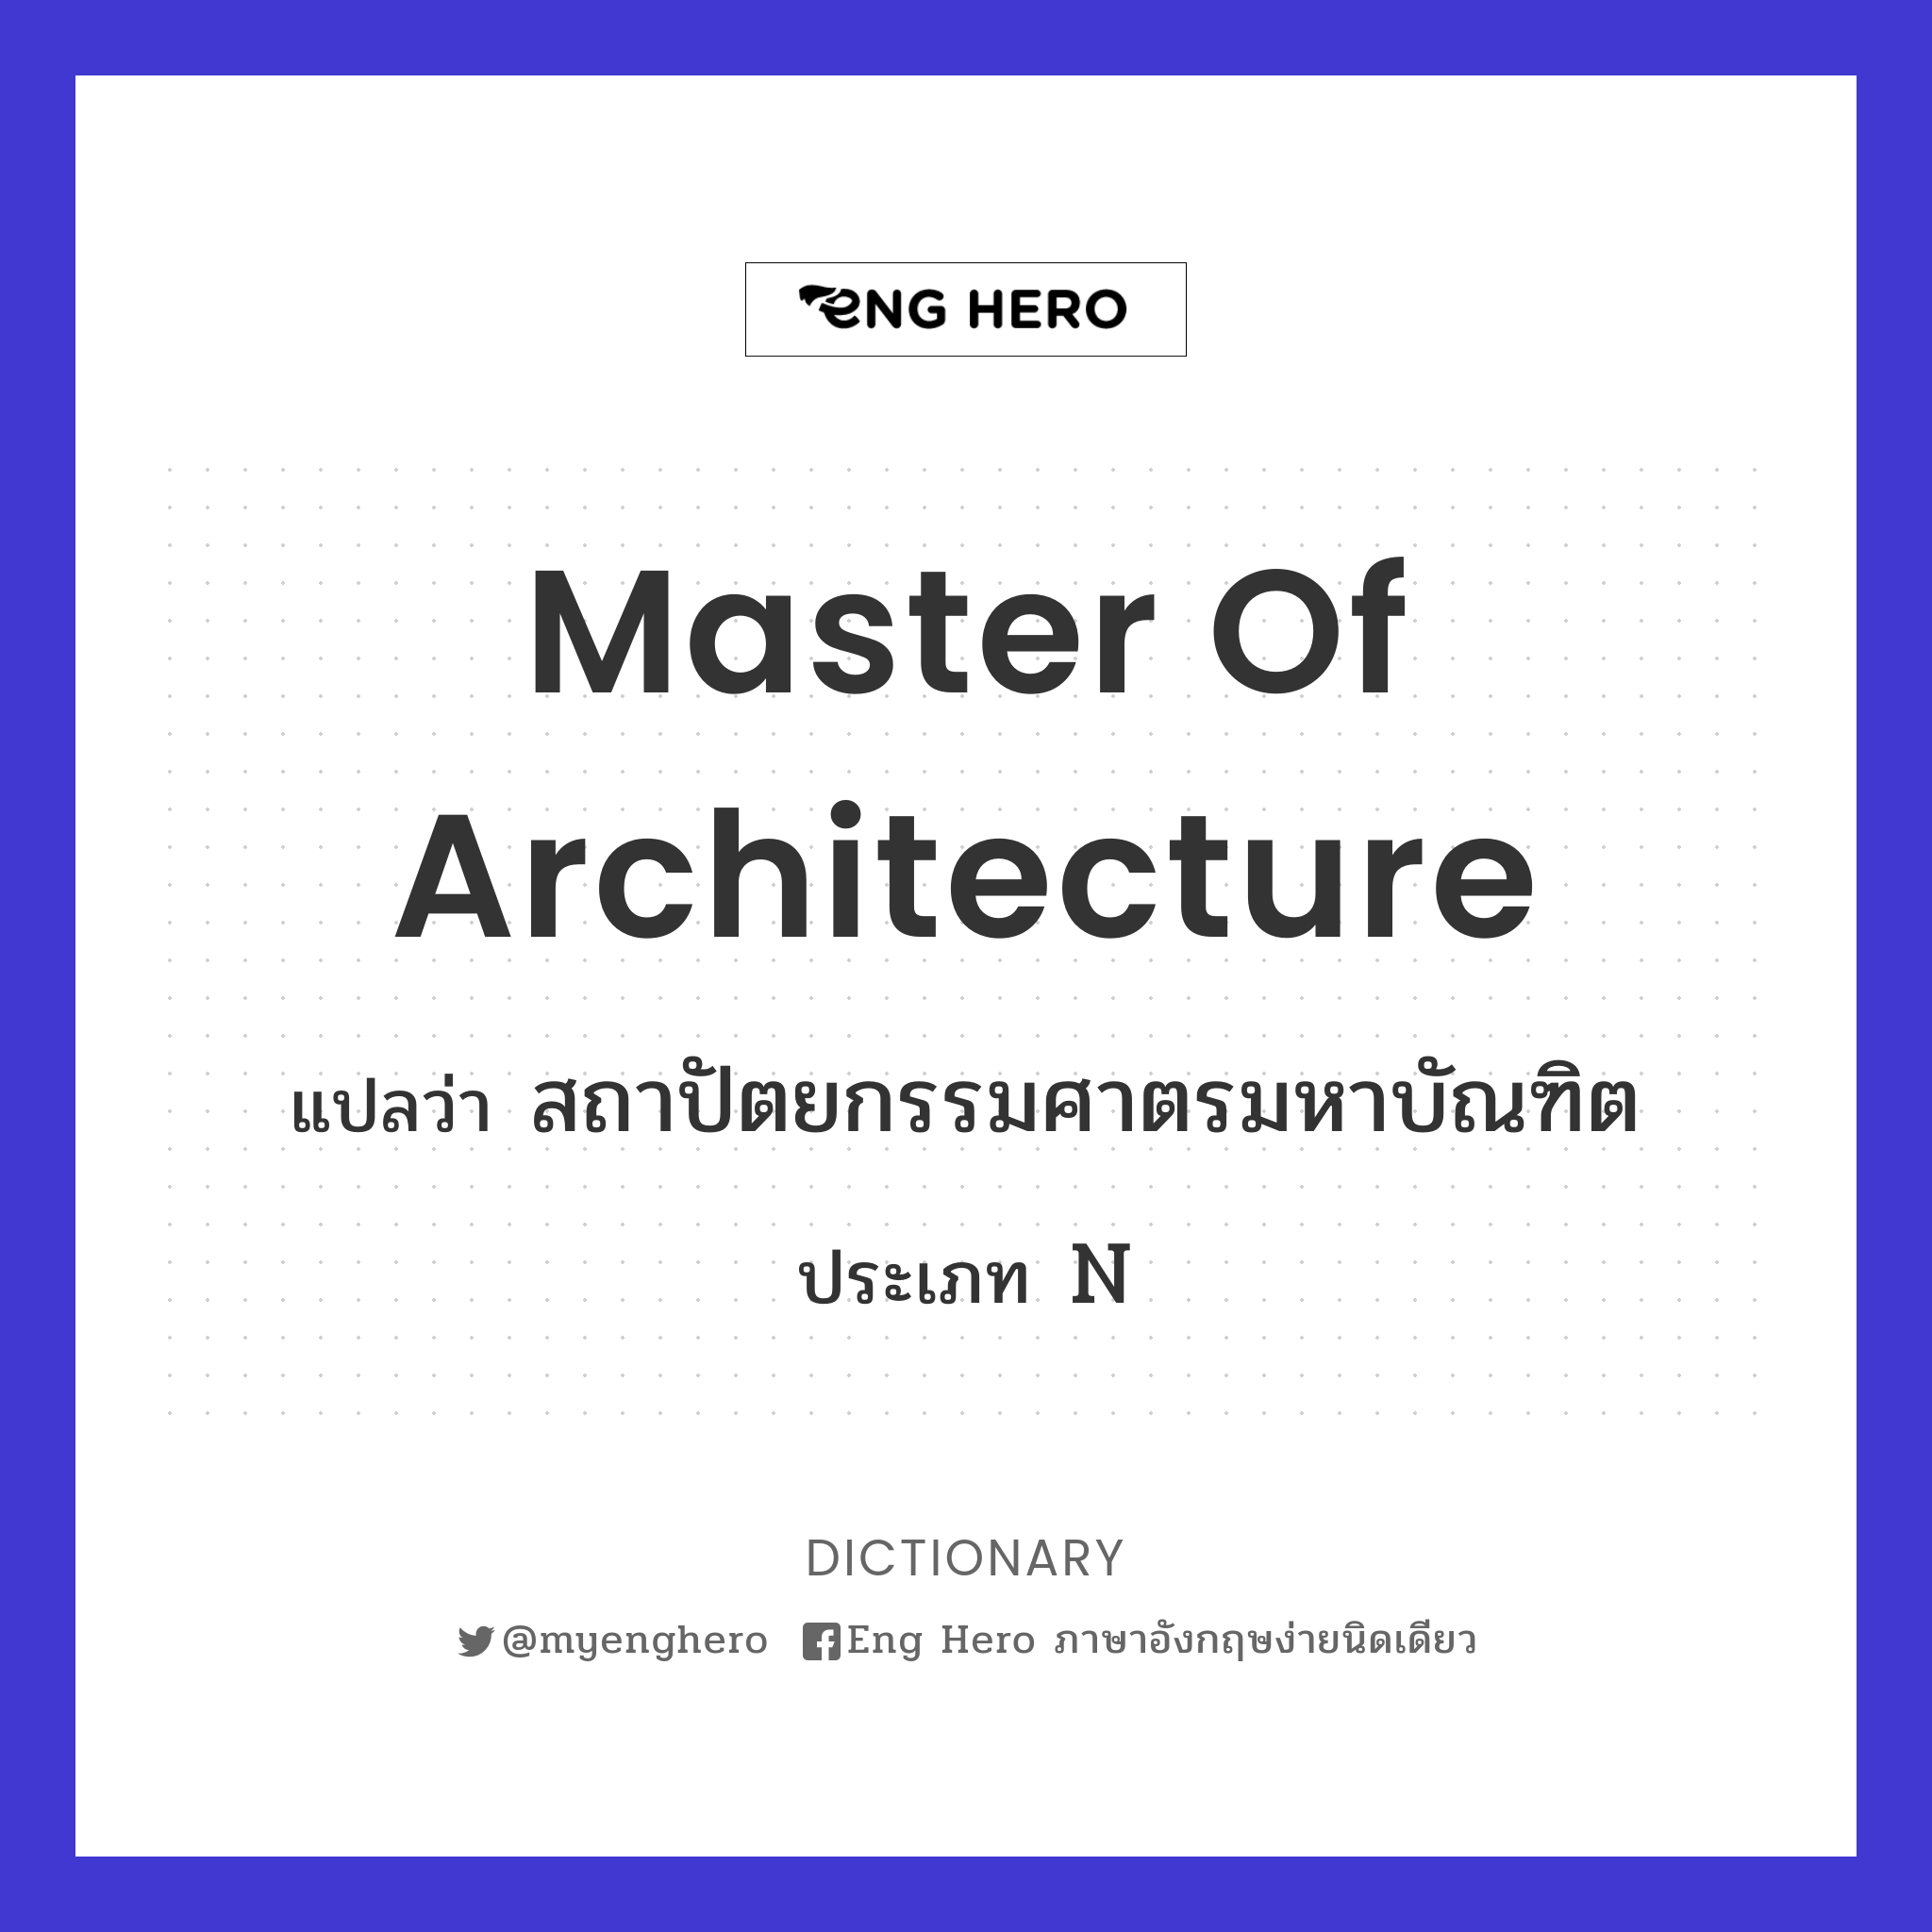 Master of Architecture